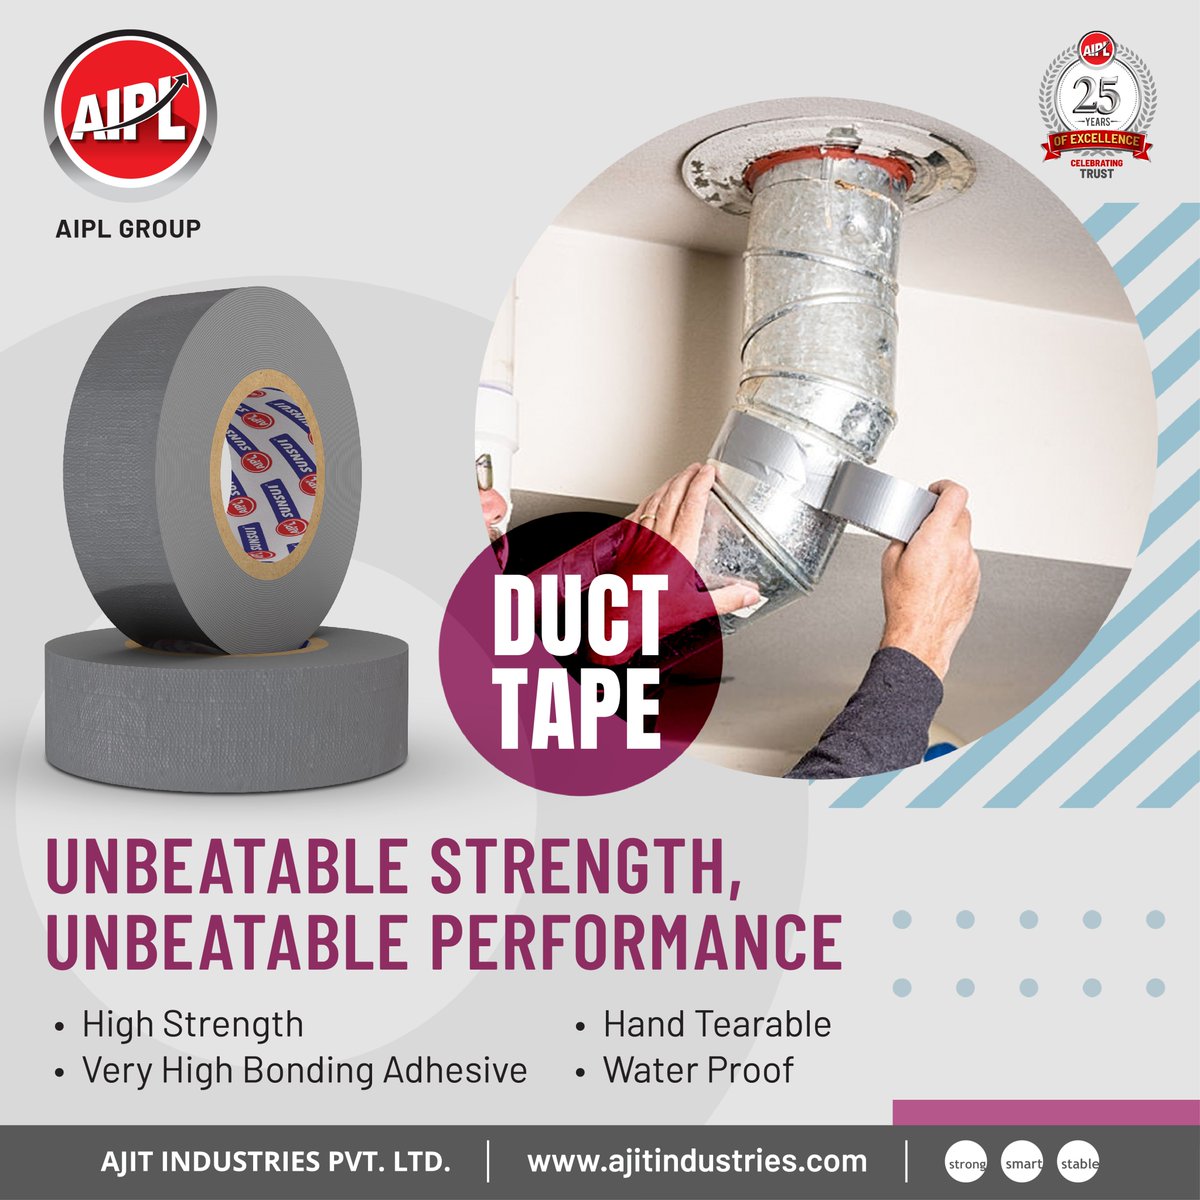 Seal leaks, secure joints, and keep your HVAC system running smoothly with our durable duct tape! 🔧✨

#AIPL #Ajitindustries #HVAC #DuctTape #MaintenanceEssentials #FixItRight #StayCool #HVACLife #DuctworkSolutions